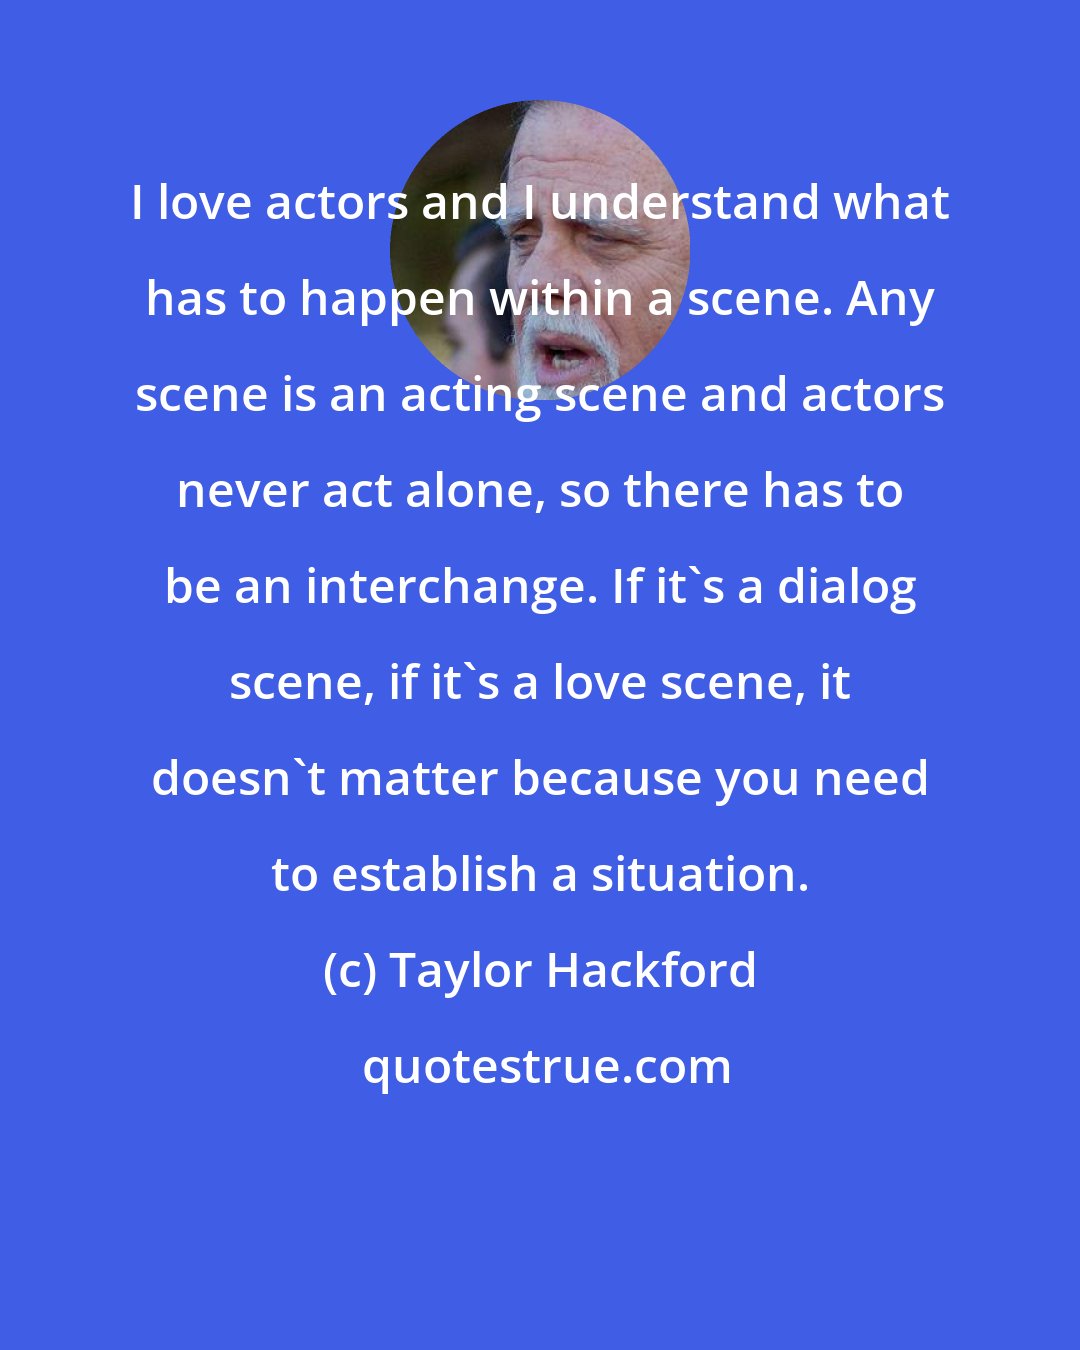 Taylor Hackford: I love actors and I understand what has to happen within a scene. Any scene is an acting scene and actors never act alone, so there has to be an interchange. If it's a dialog scene, if it's a love scene, it doesn't matter because you need to establish a situation.